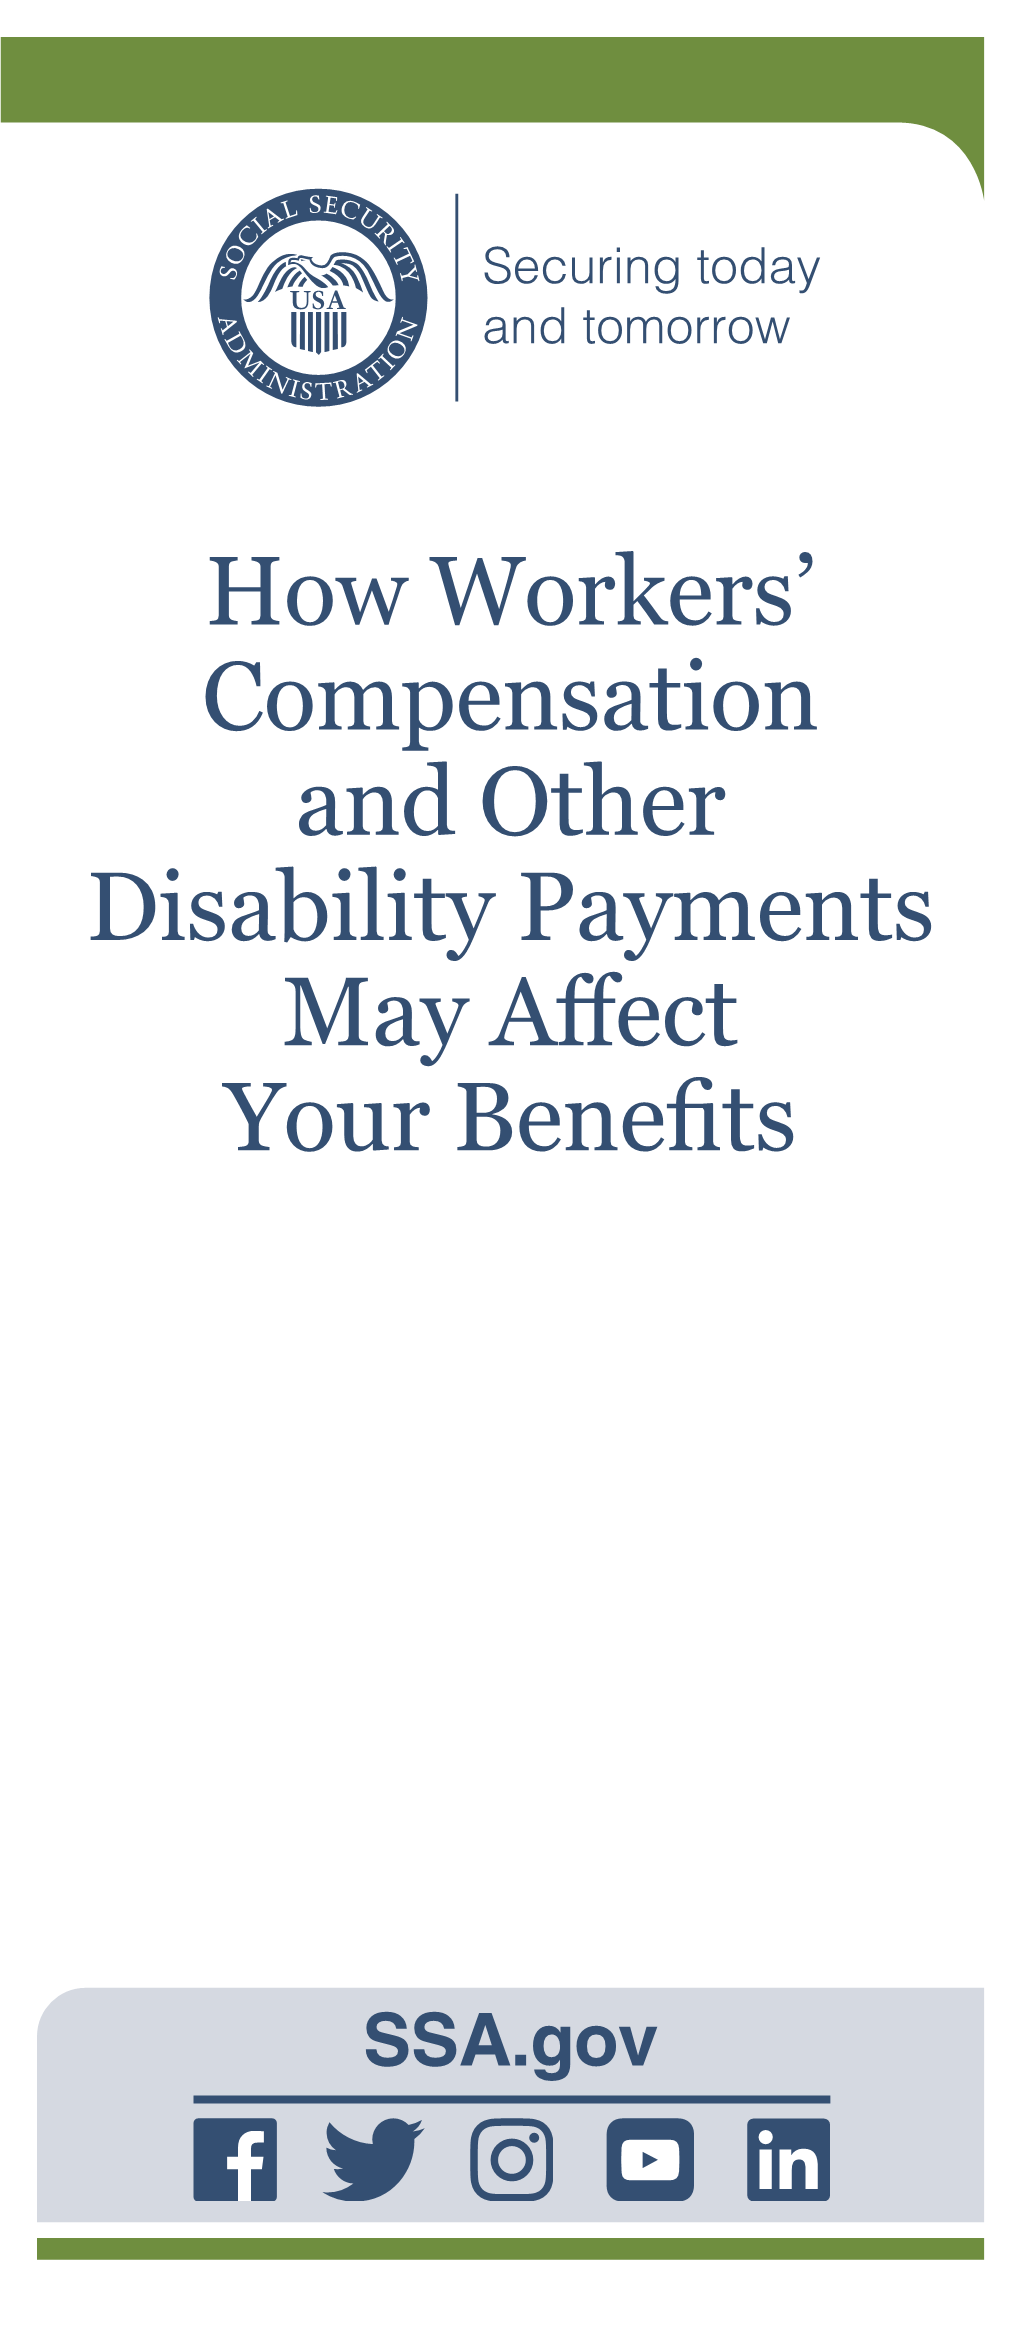 Workers' Compensation and Other Disability Payments May Affect Your